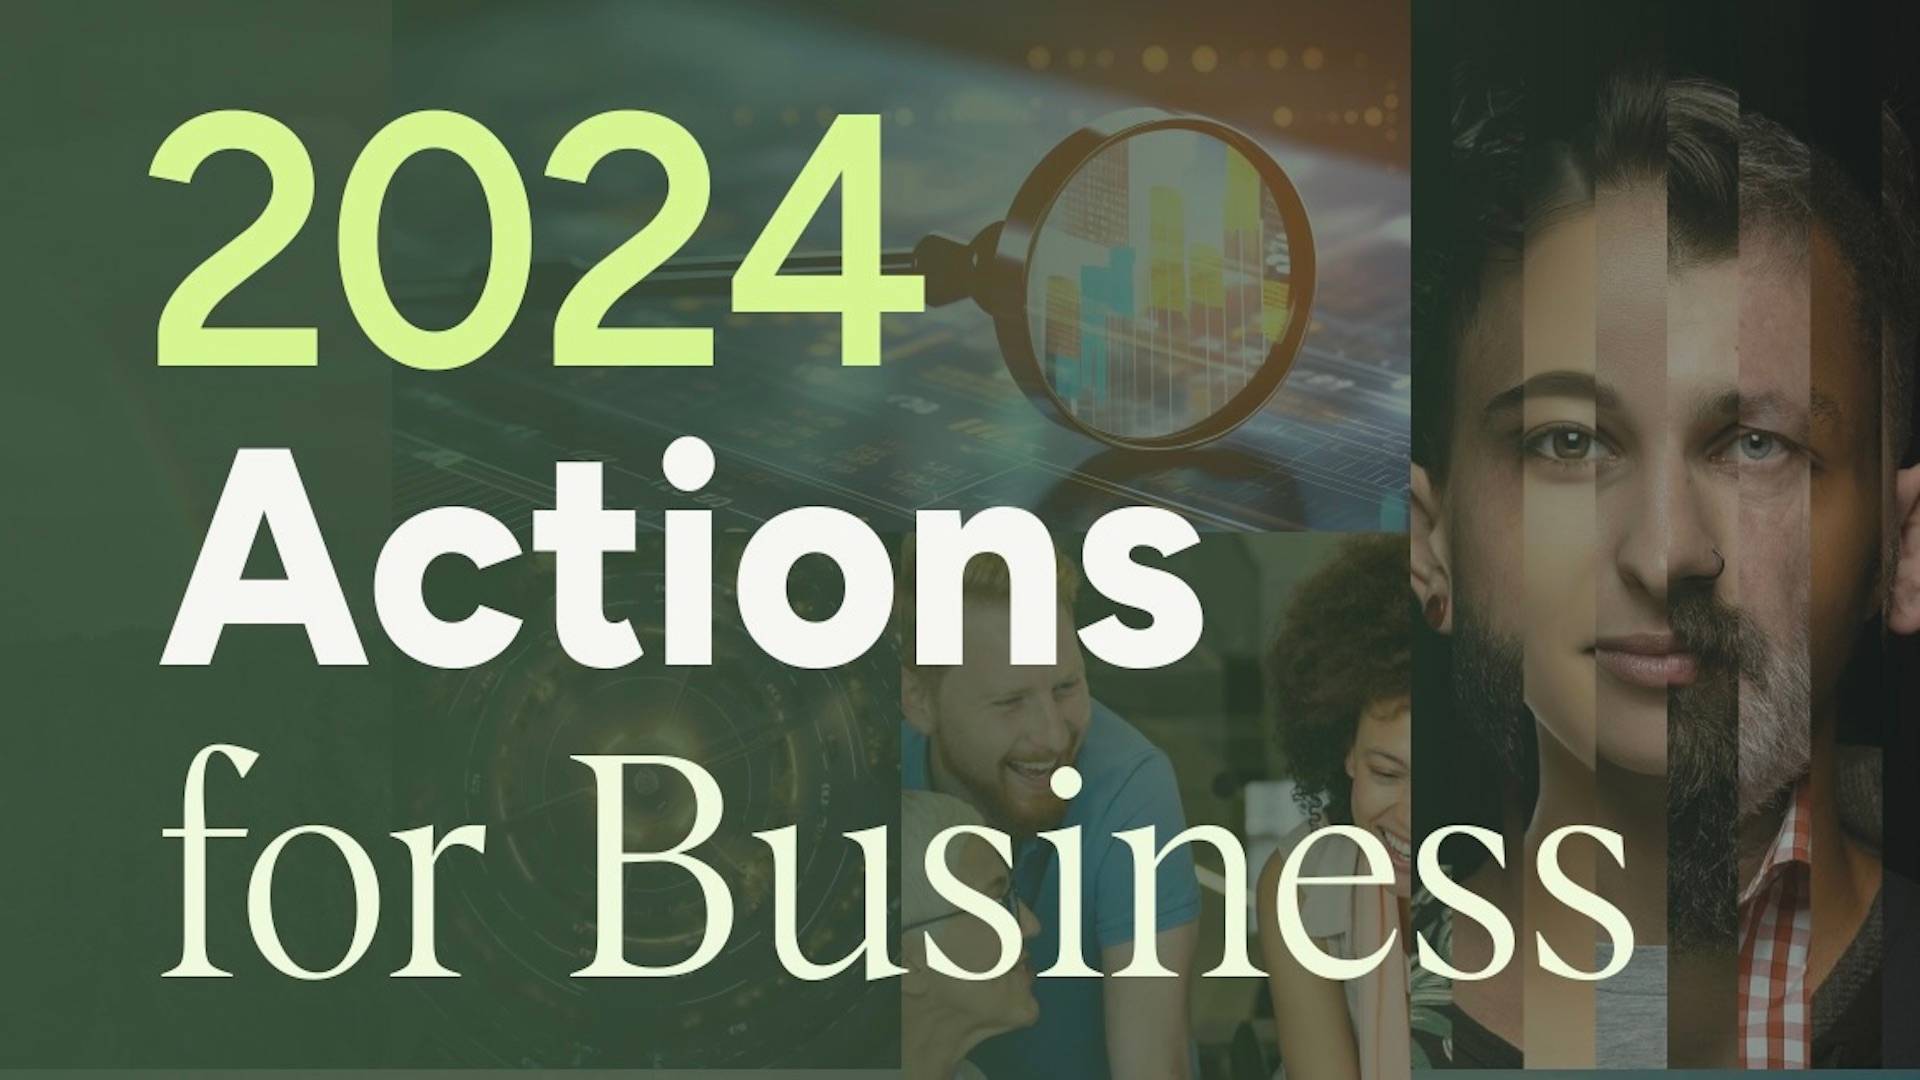 Insights from SLR's Actions for Business Report 2024